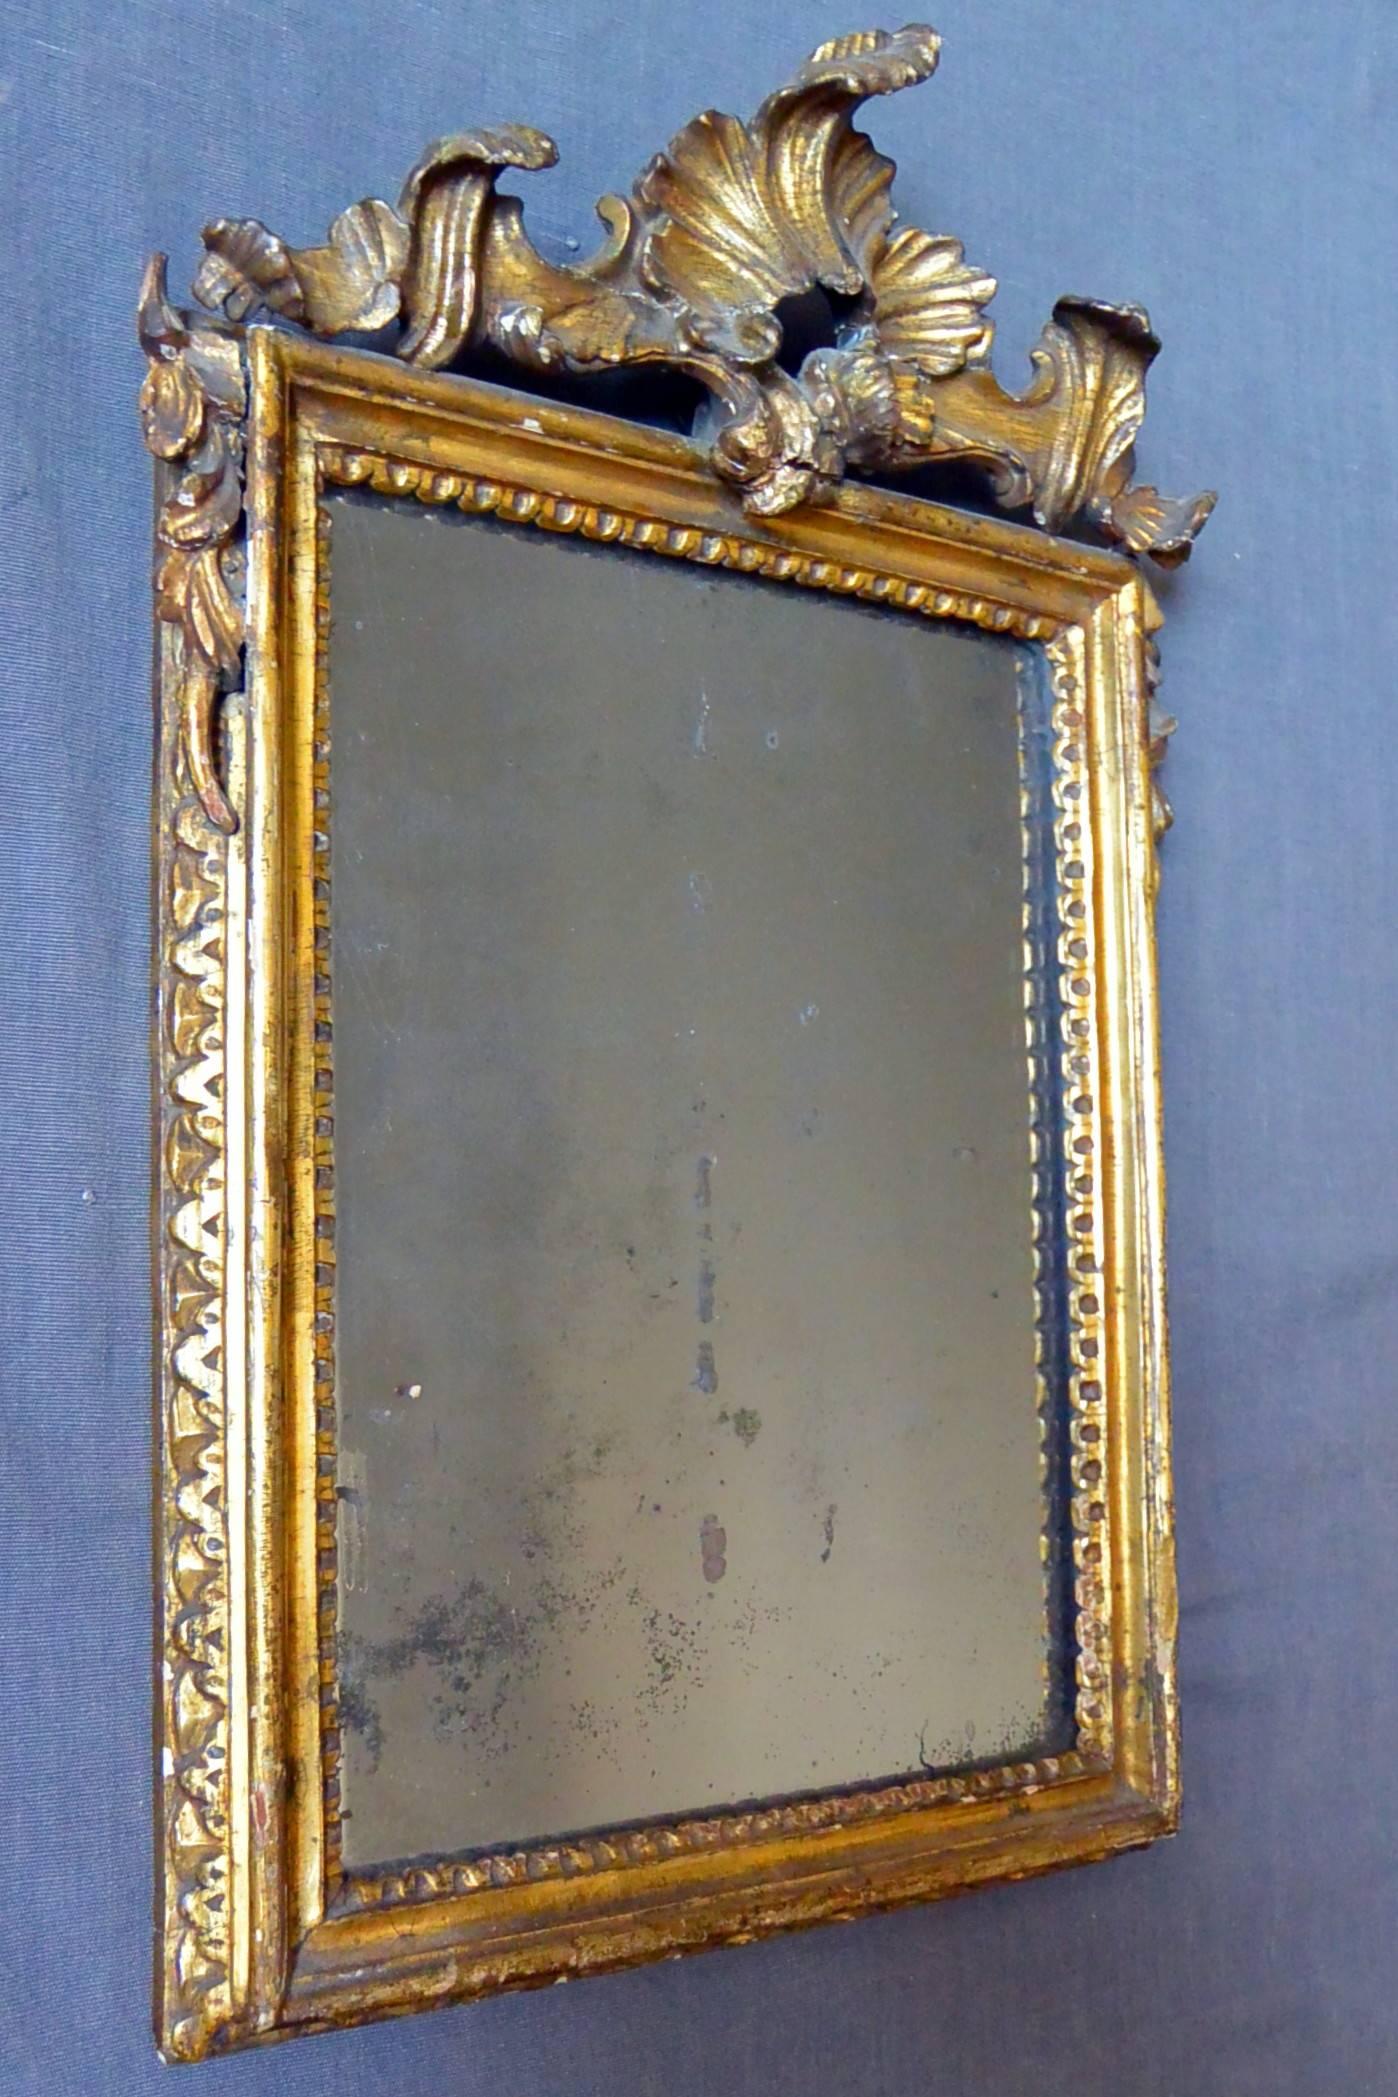 Rococo gilt carved mirror with original mirror plate, Italy, late 18th century. 
Dimension: 11